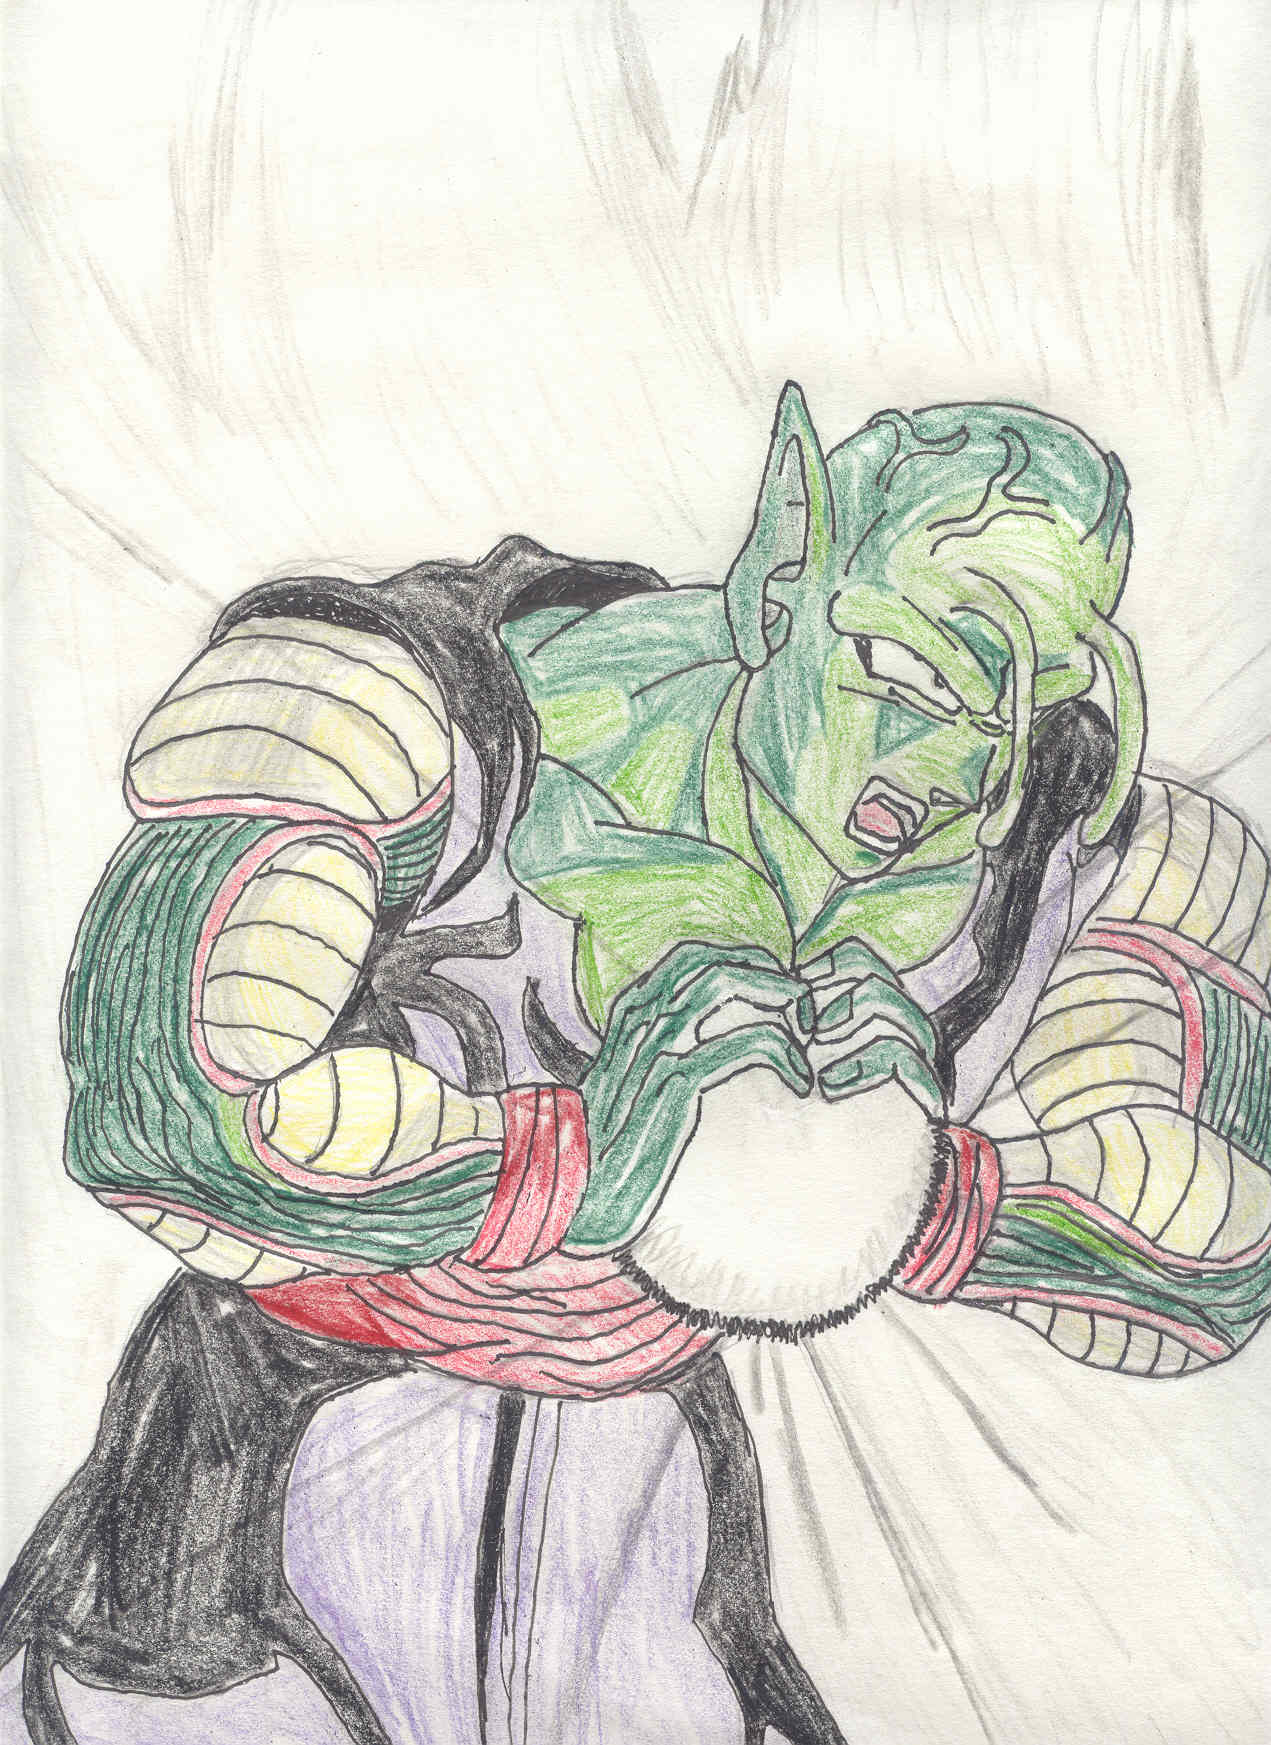 Piccolo by MageKnight007